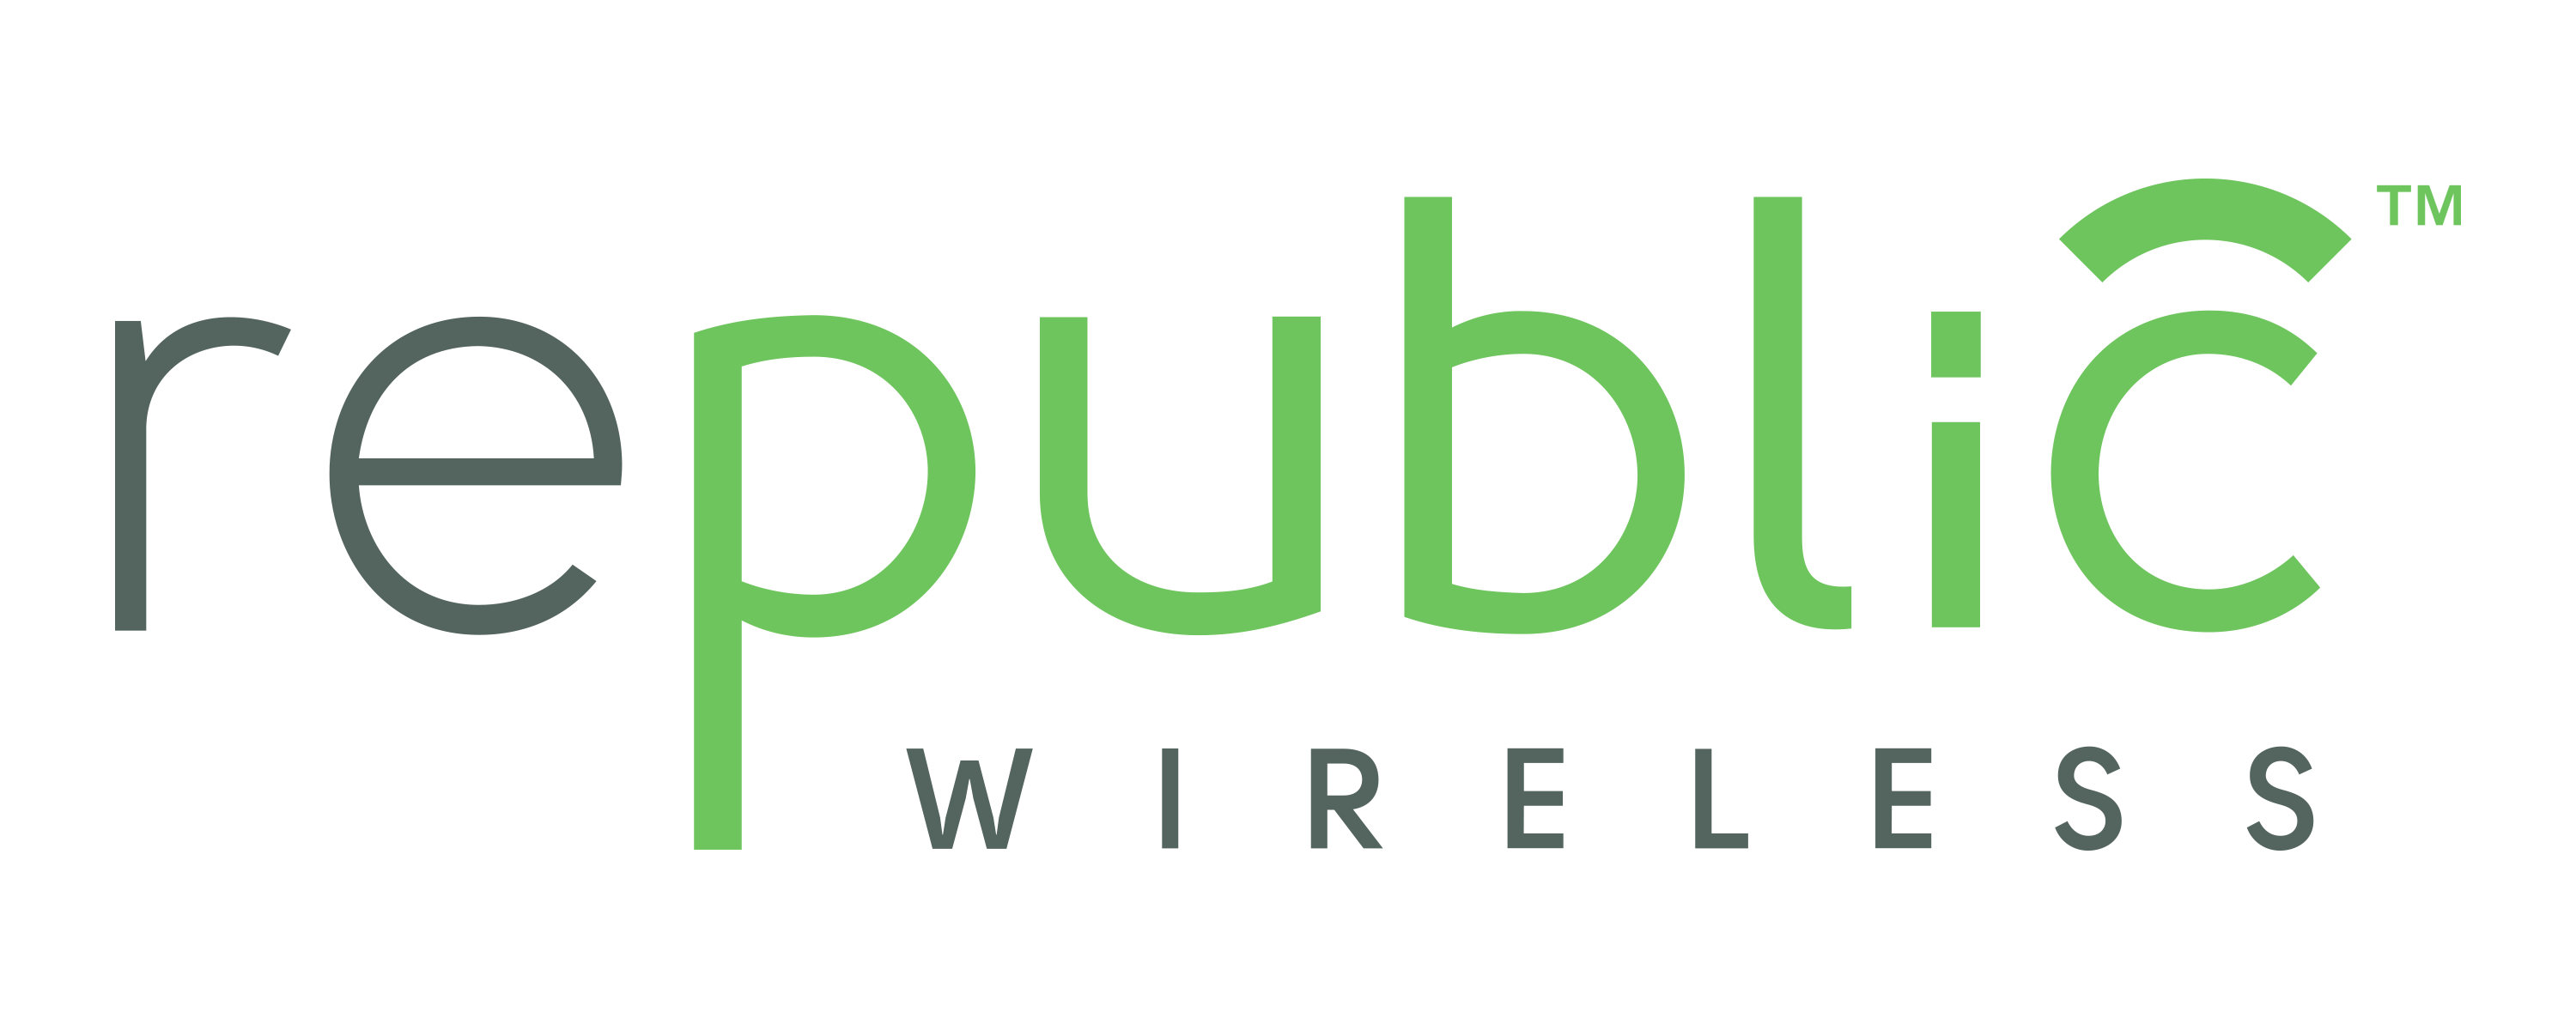 WiFi calling pioneer, Republic Wireless raises the bar yet again with groundbreaking improvements to WiFi Call quality.